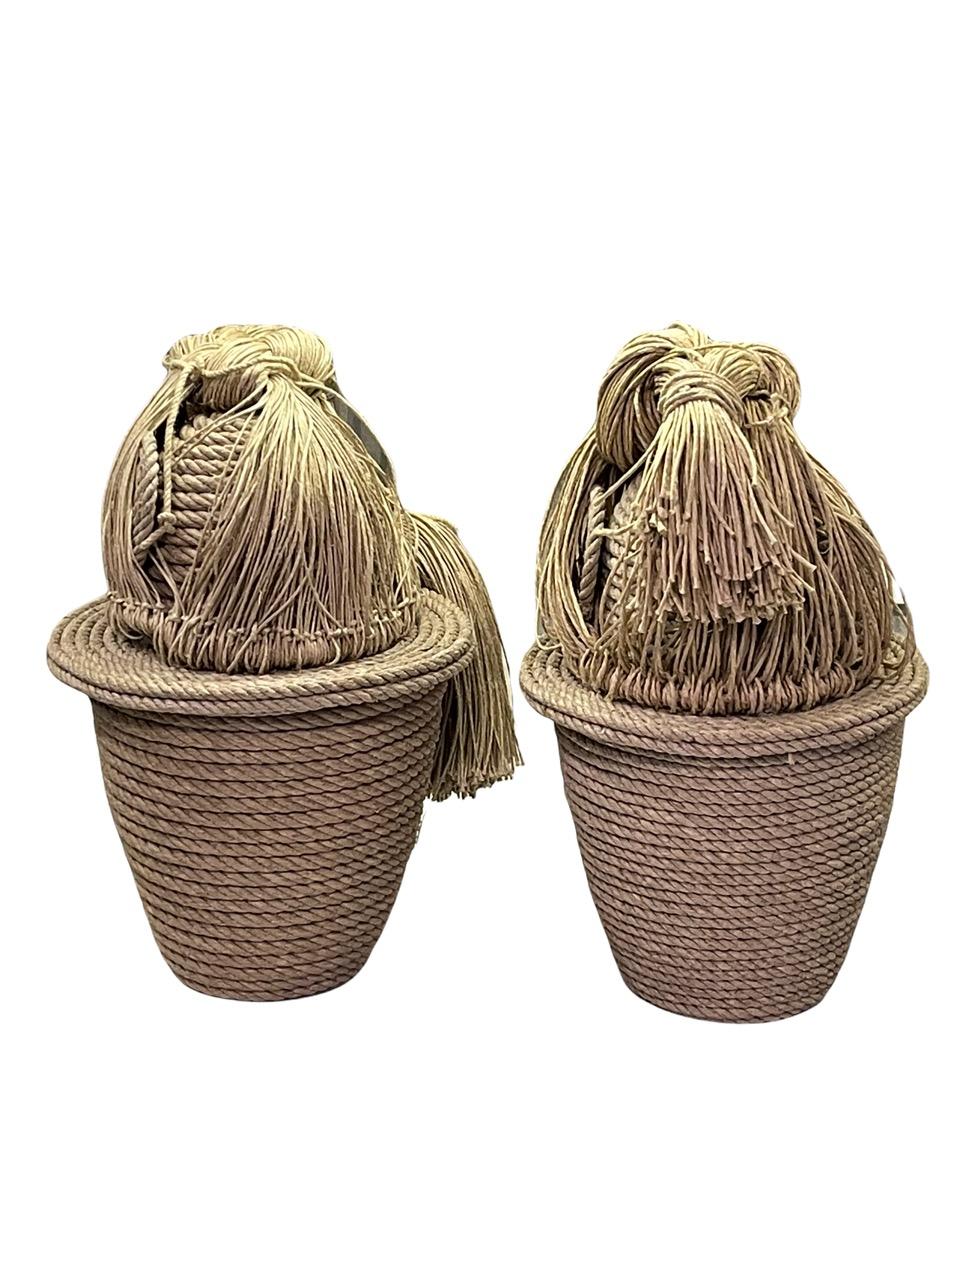 Pair of Contemporary 21st Century French Christian Astuguevieille Jute Rope Co 2